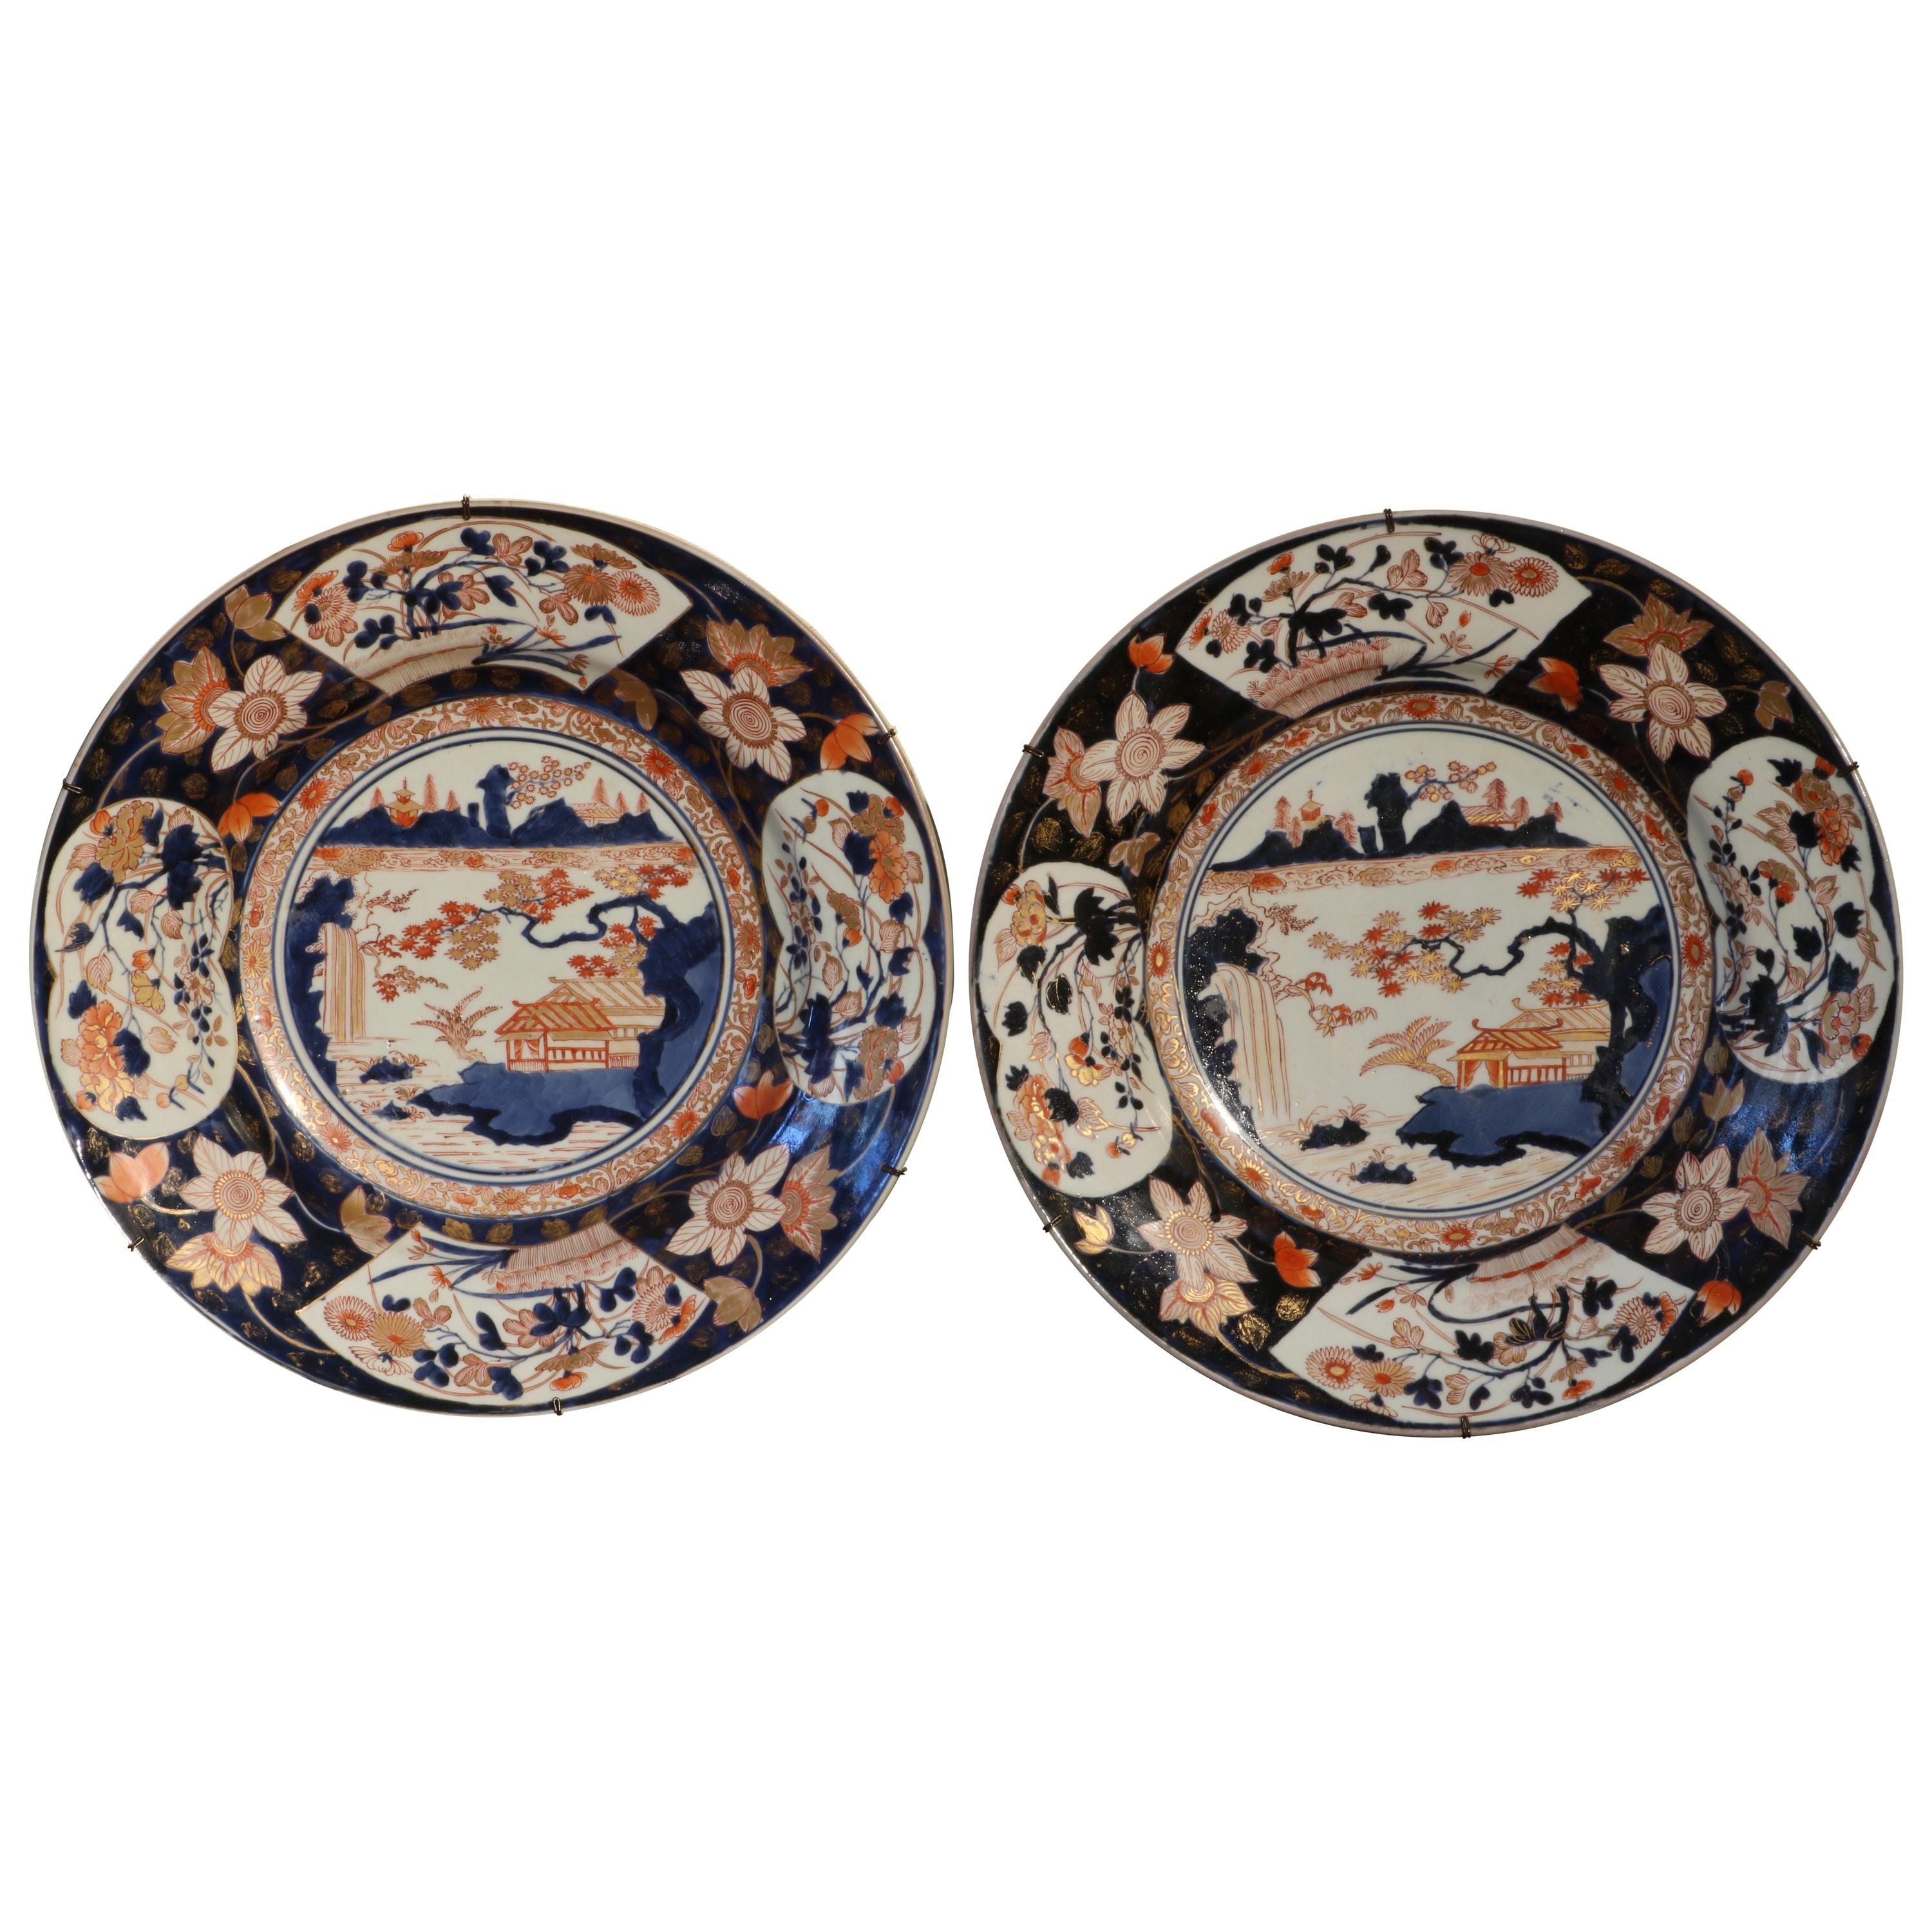 Pair of Japanese Porcelain Imari Chargers Late 17th Century For Sale